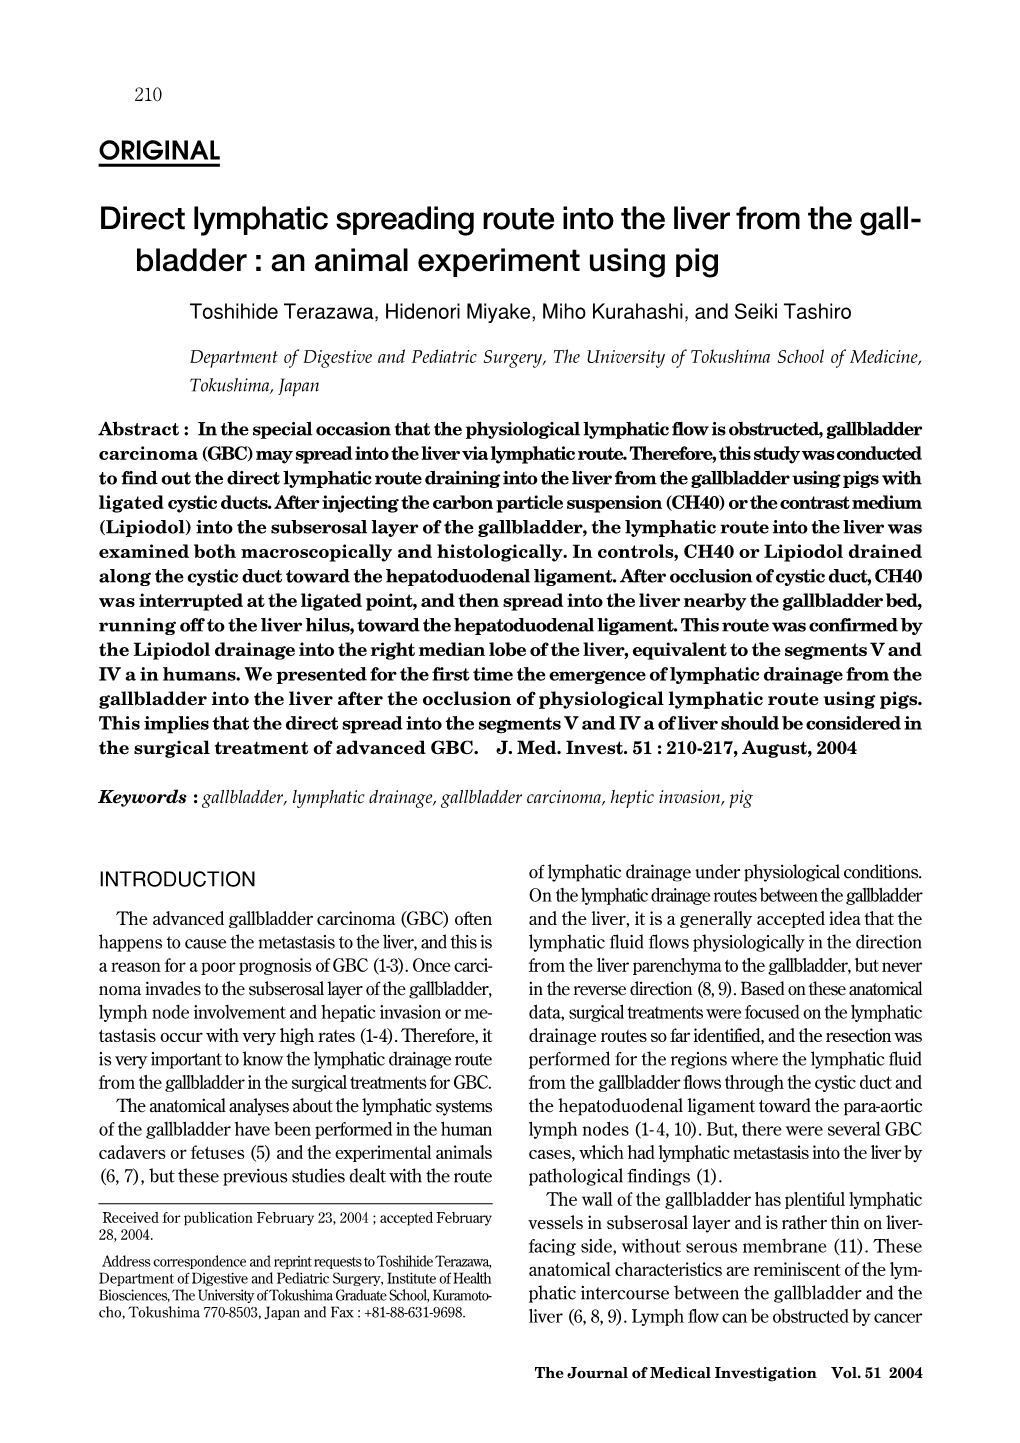 Direct Lymphatic Spreading Route Into the Liver from the Gall- Bladder : an Animal Experiment Using Pig